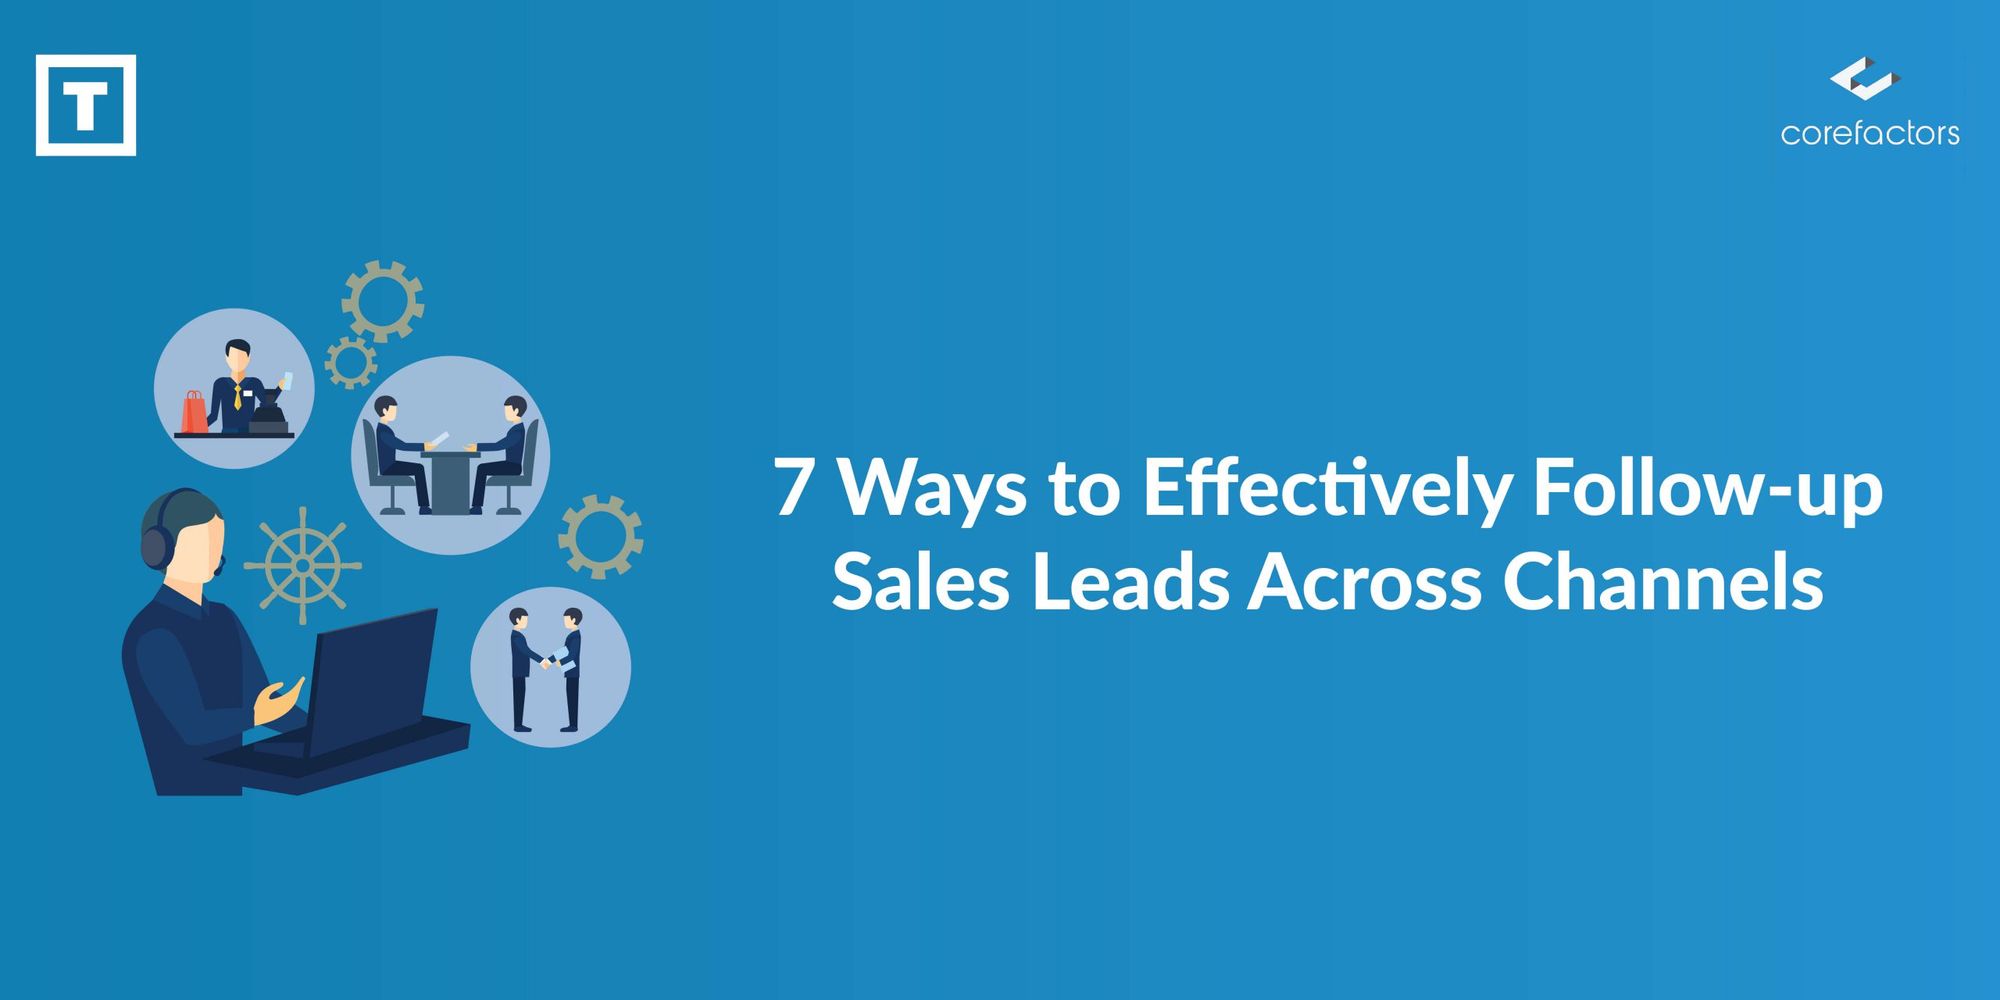 How to Follow Up and Convert Sales Leads (7 Proven Ways Explained)